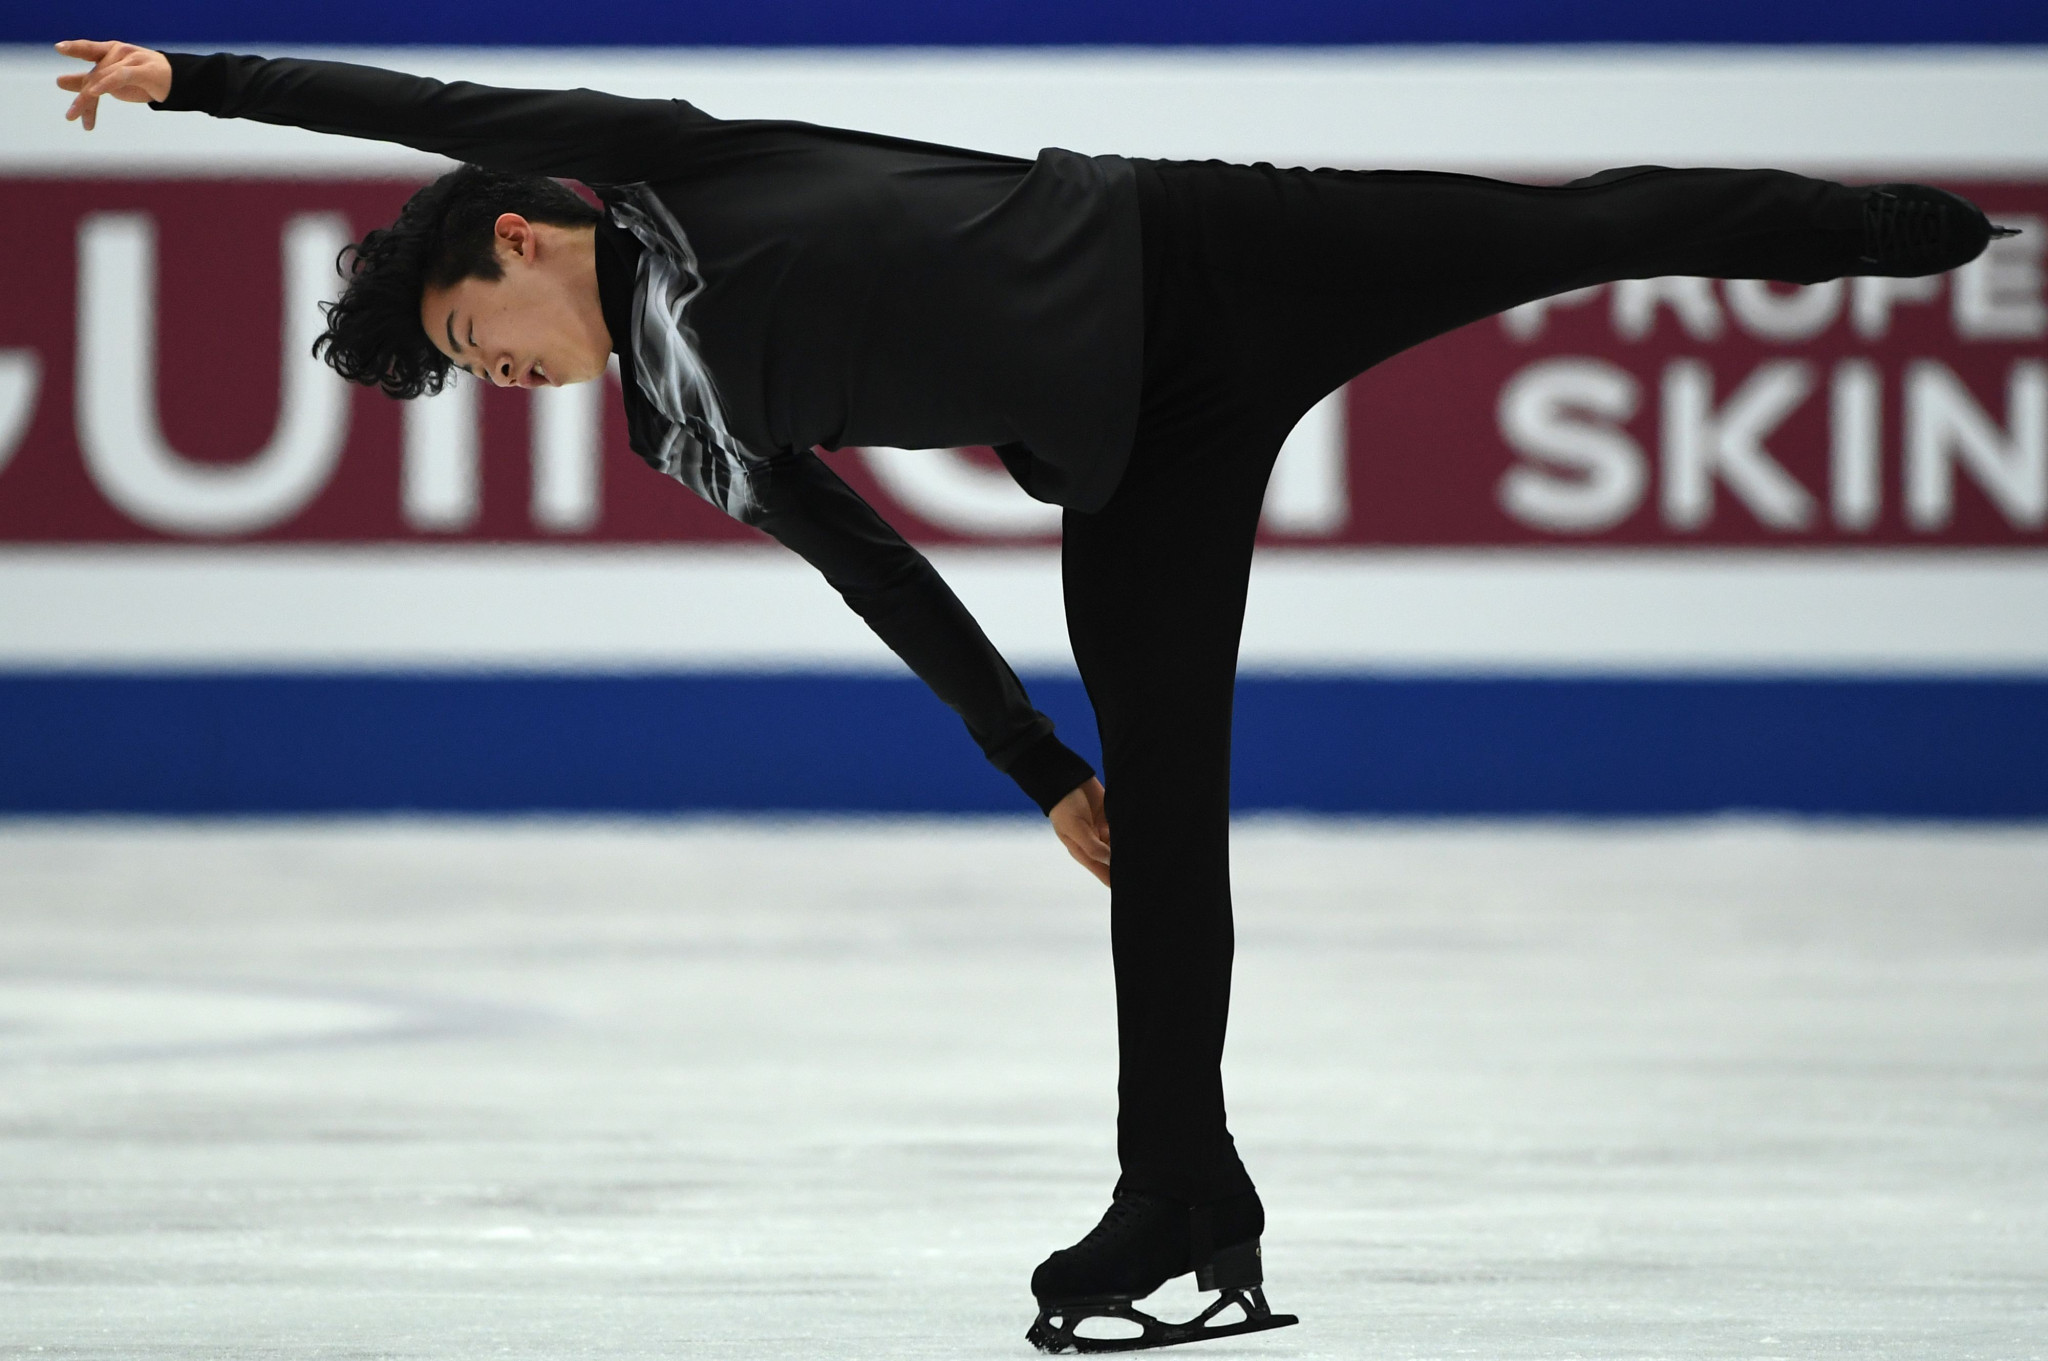 Nathan Chen captured his third Skate America title last month ©Getty Images